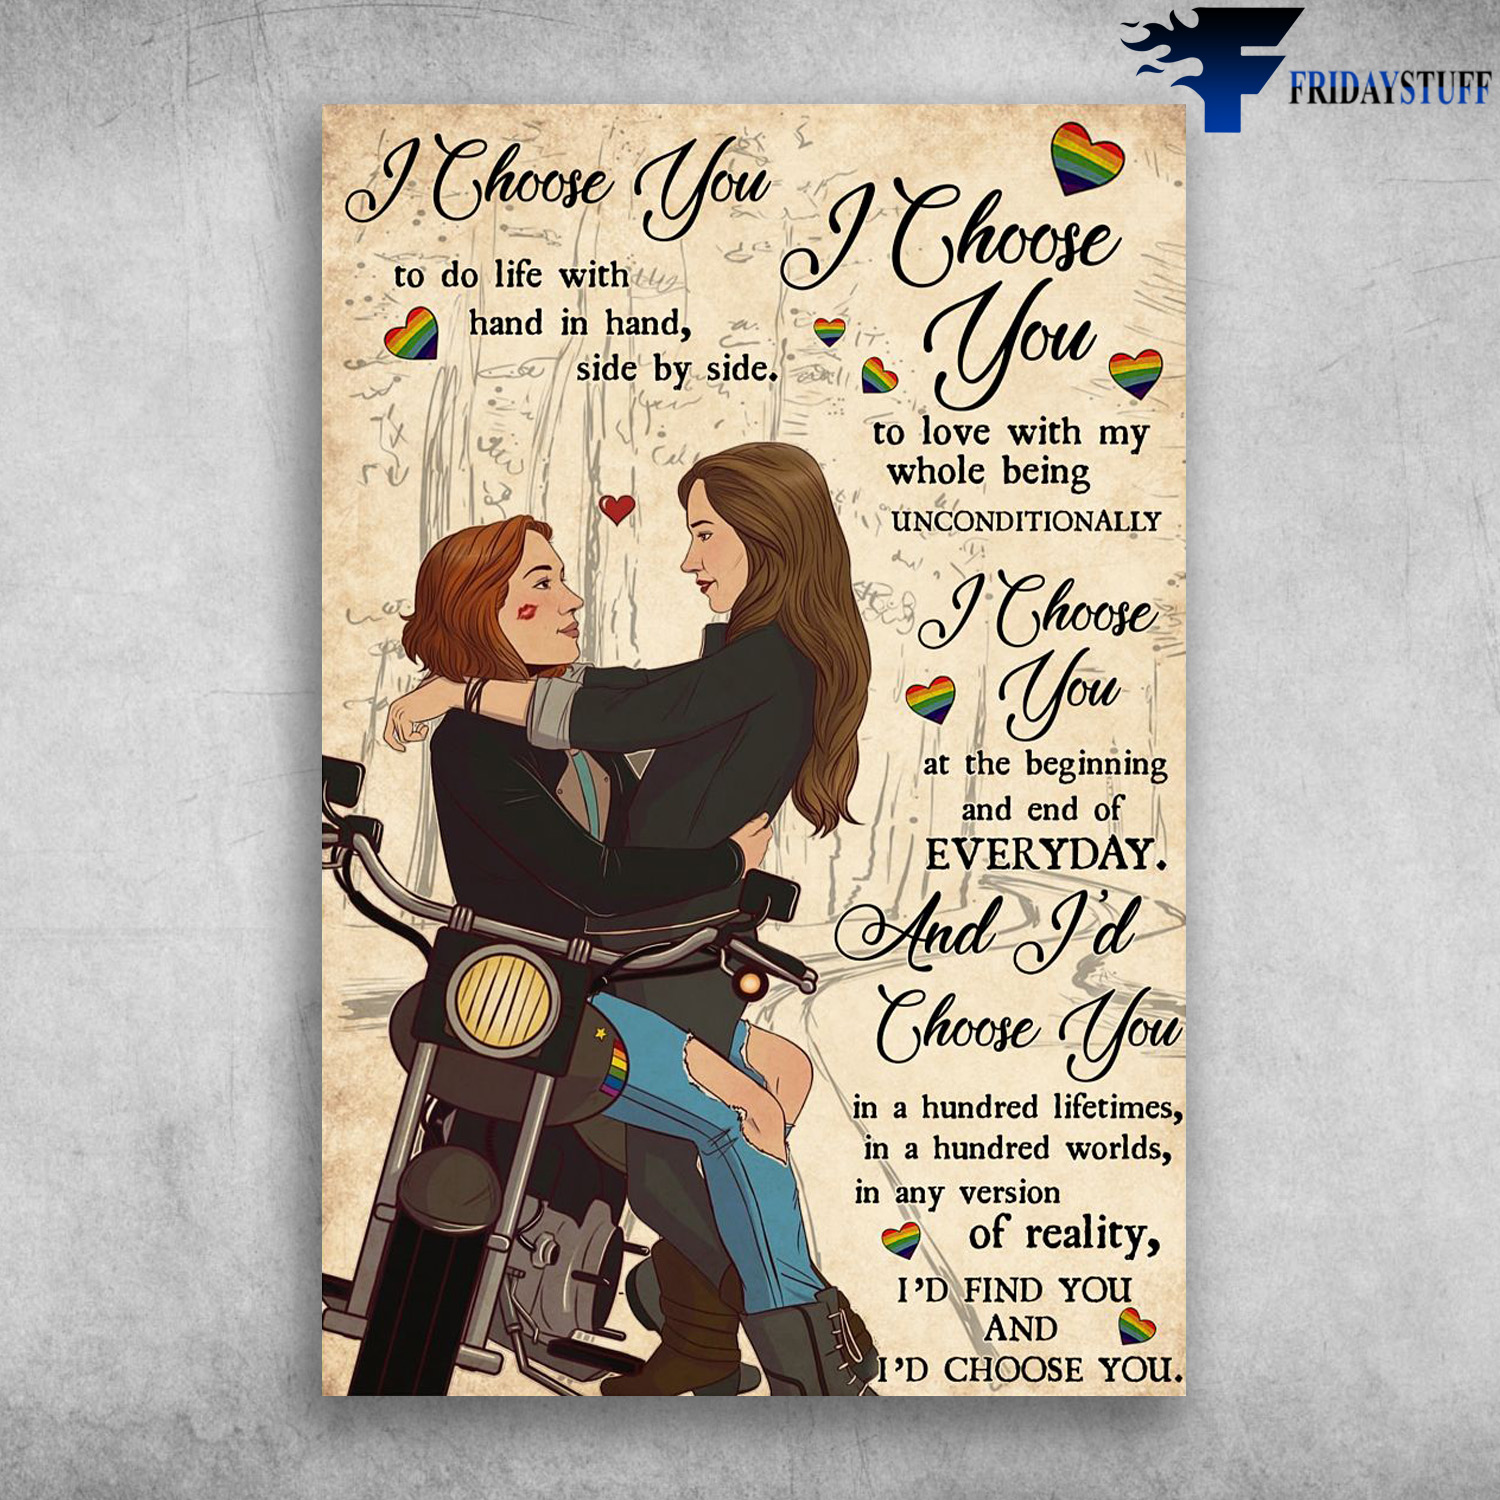 Lesbian Motorcycle Couple - I Choose You, To Do Life With Hand In Hand, Side By Side, I Choose You To Love With My Whole Being Unconditionally, I Choose You, At The Beginning And End Of Everyday